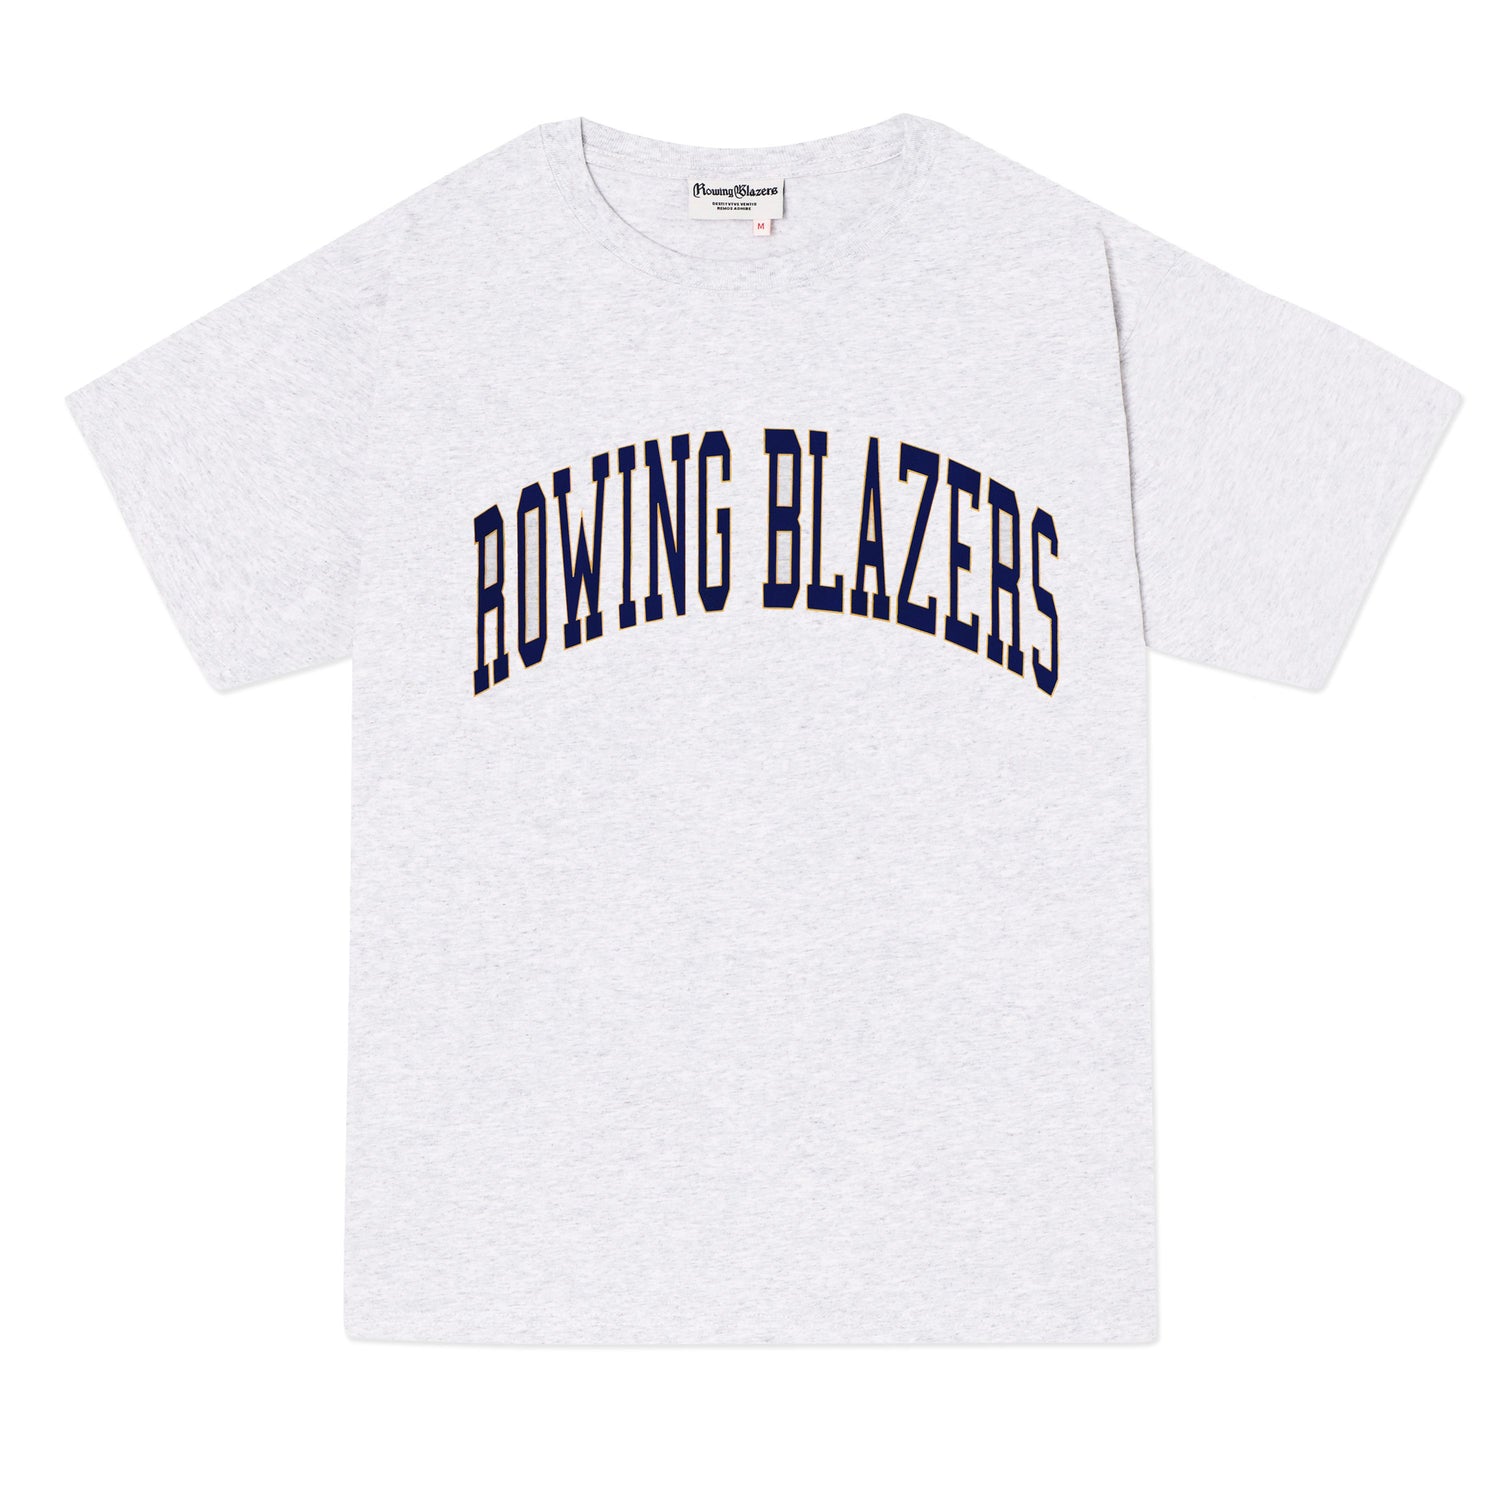 Classic light heather gray collegiate tee with "Rowing Blazers" across the front in navy.